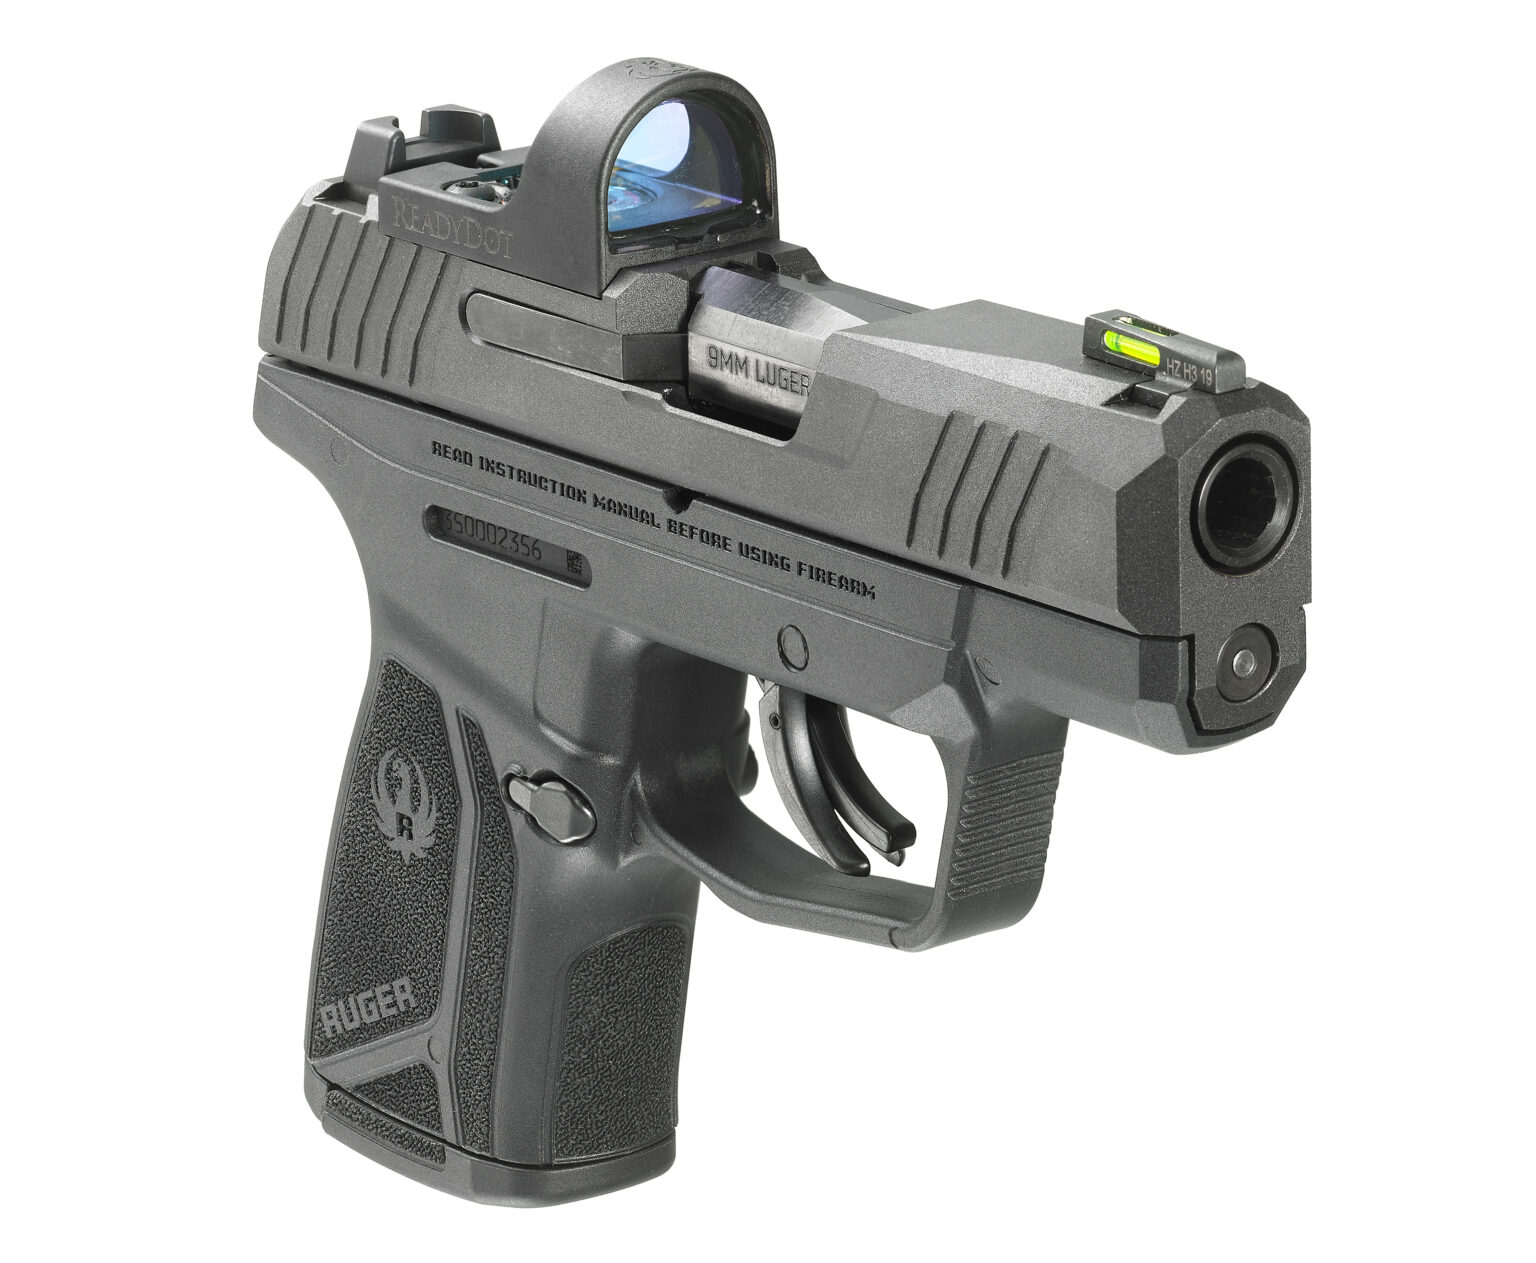 Ruger Unveils Readydot Micro Reflex Optic Max 9 Pistol With Sight Thegunmag The Official 1974